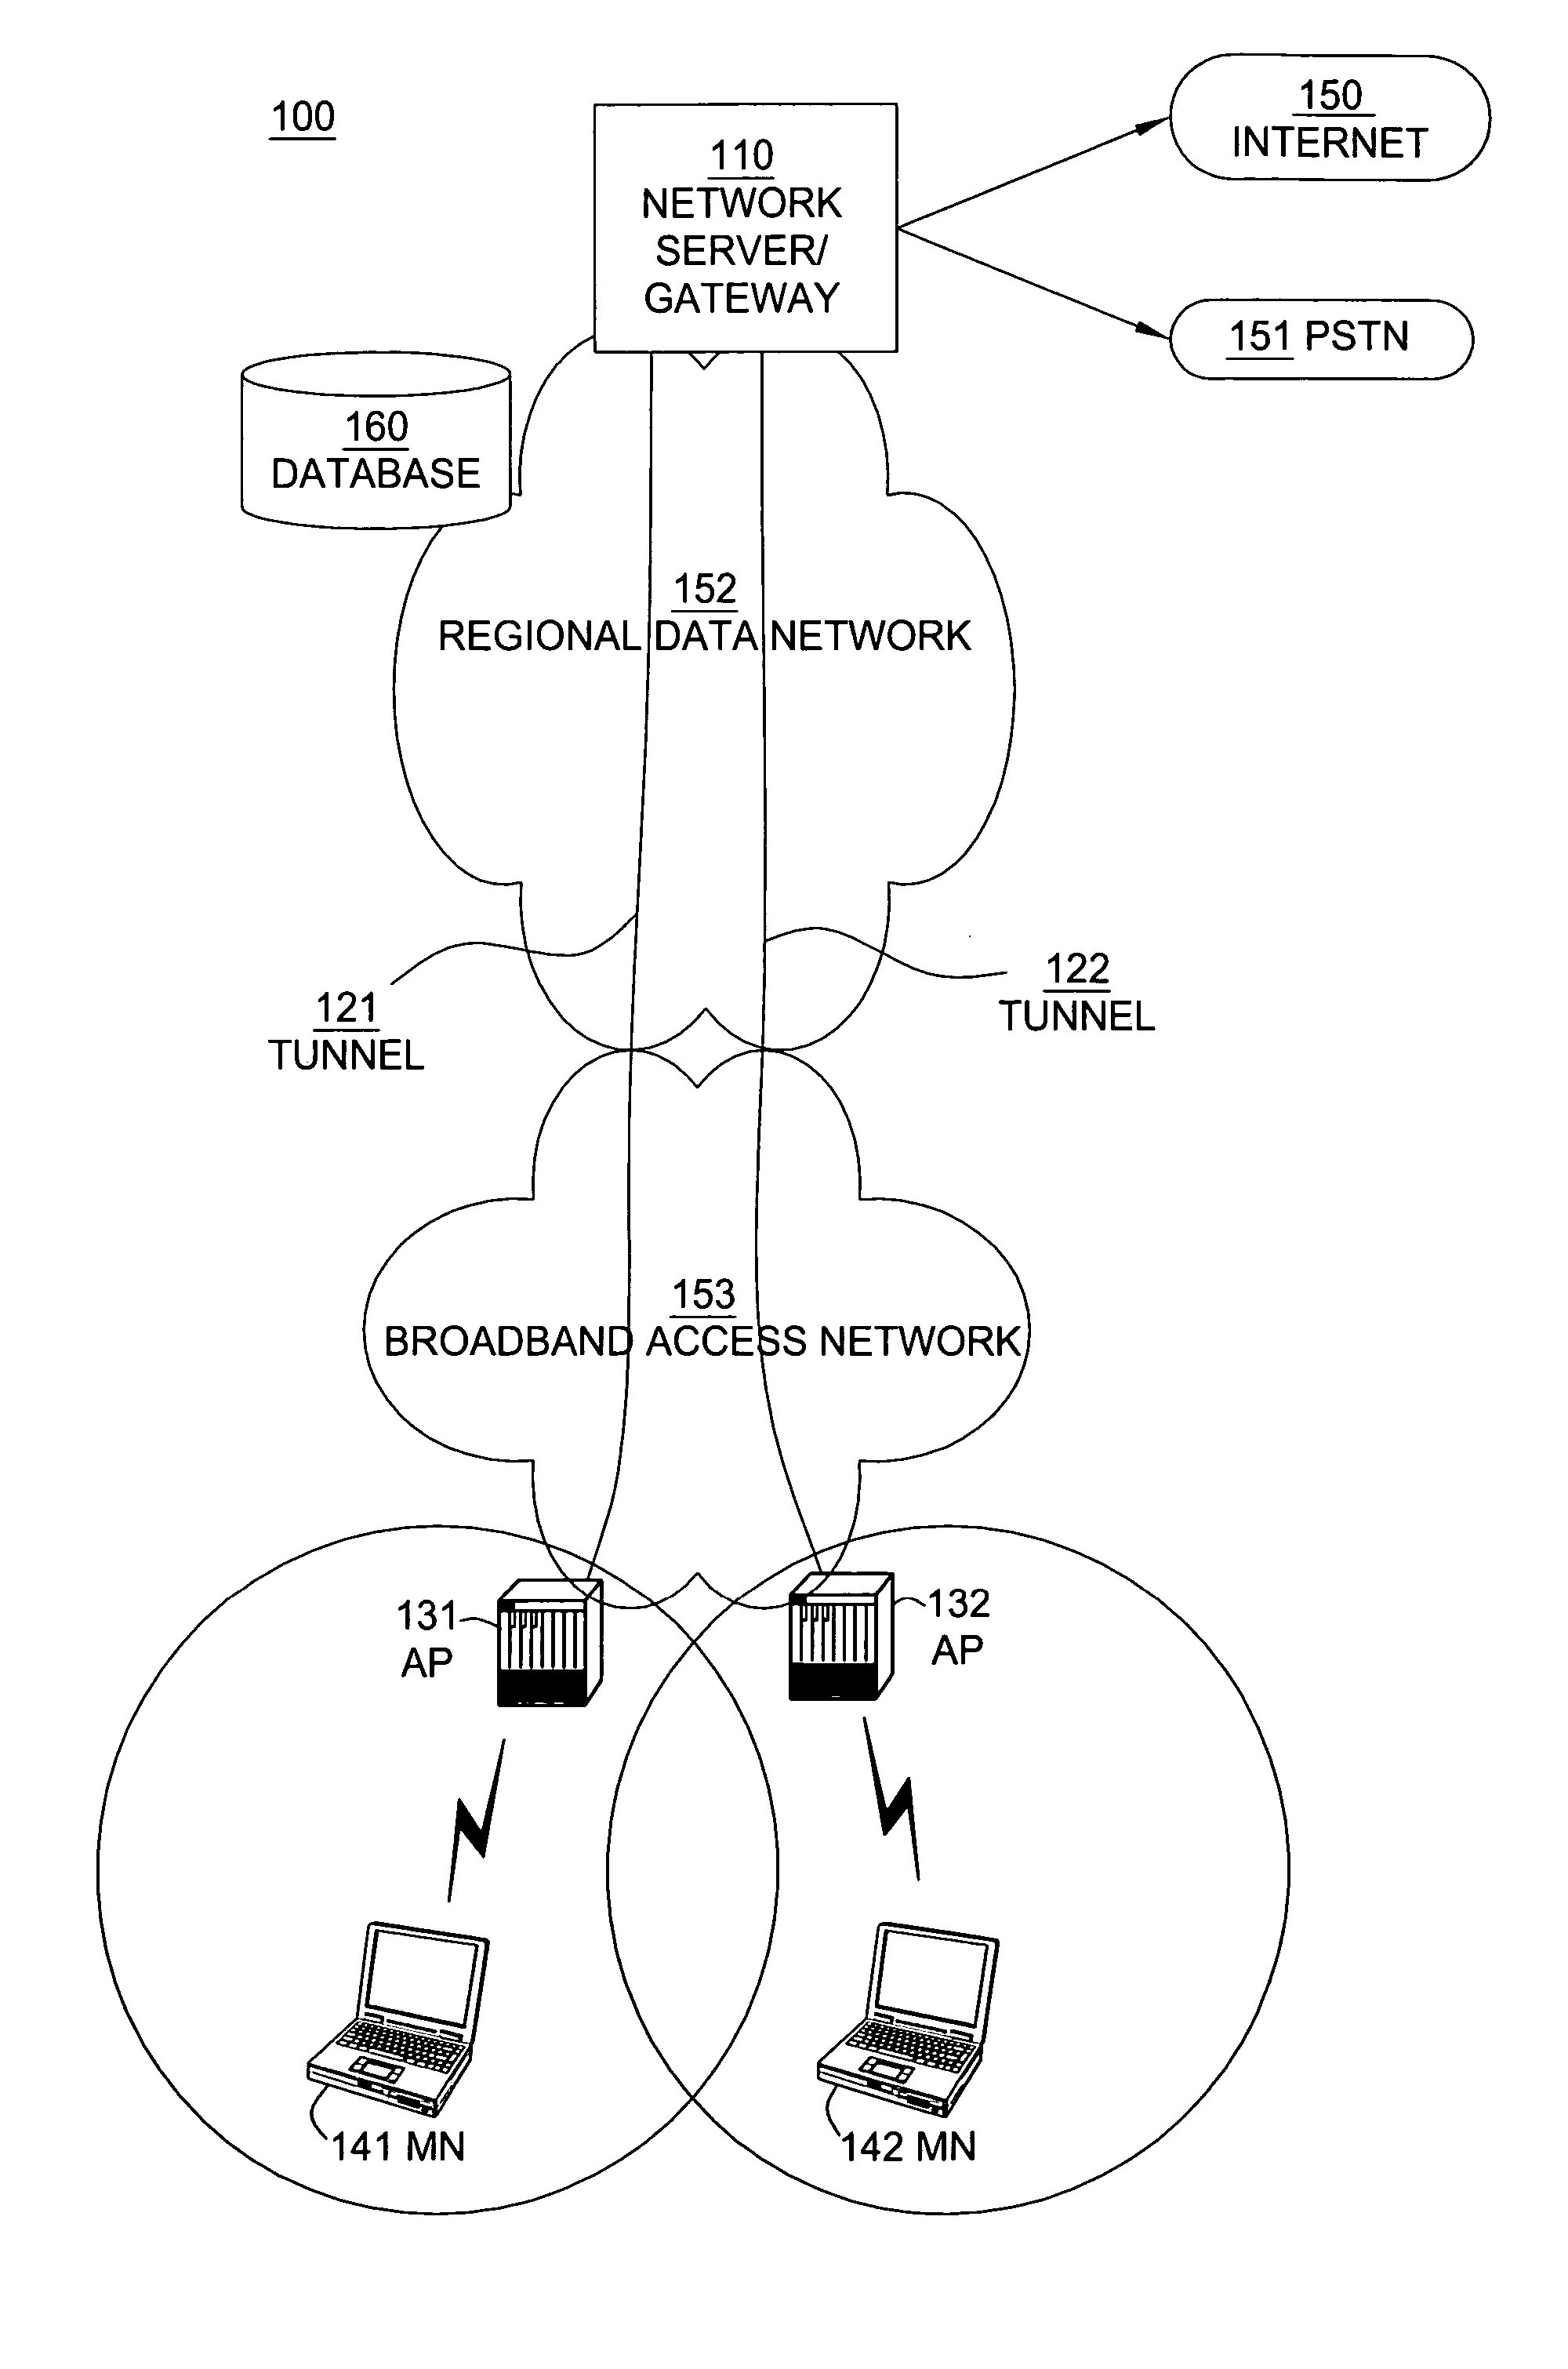 Method and apparatus for enabling IP mobility with high speed access and network intelligence in communication networks